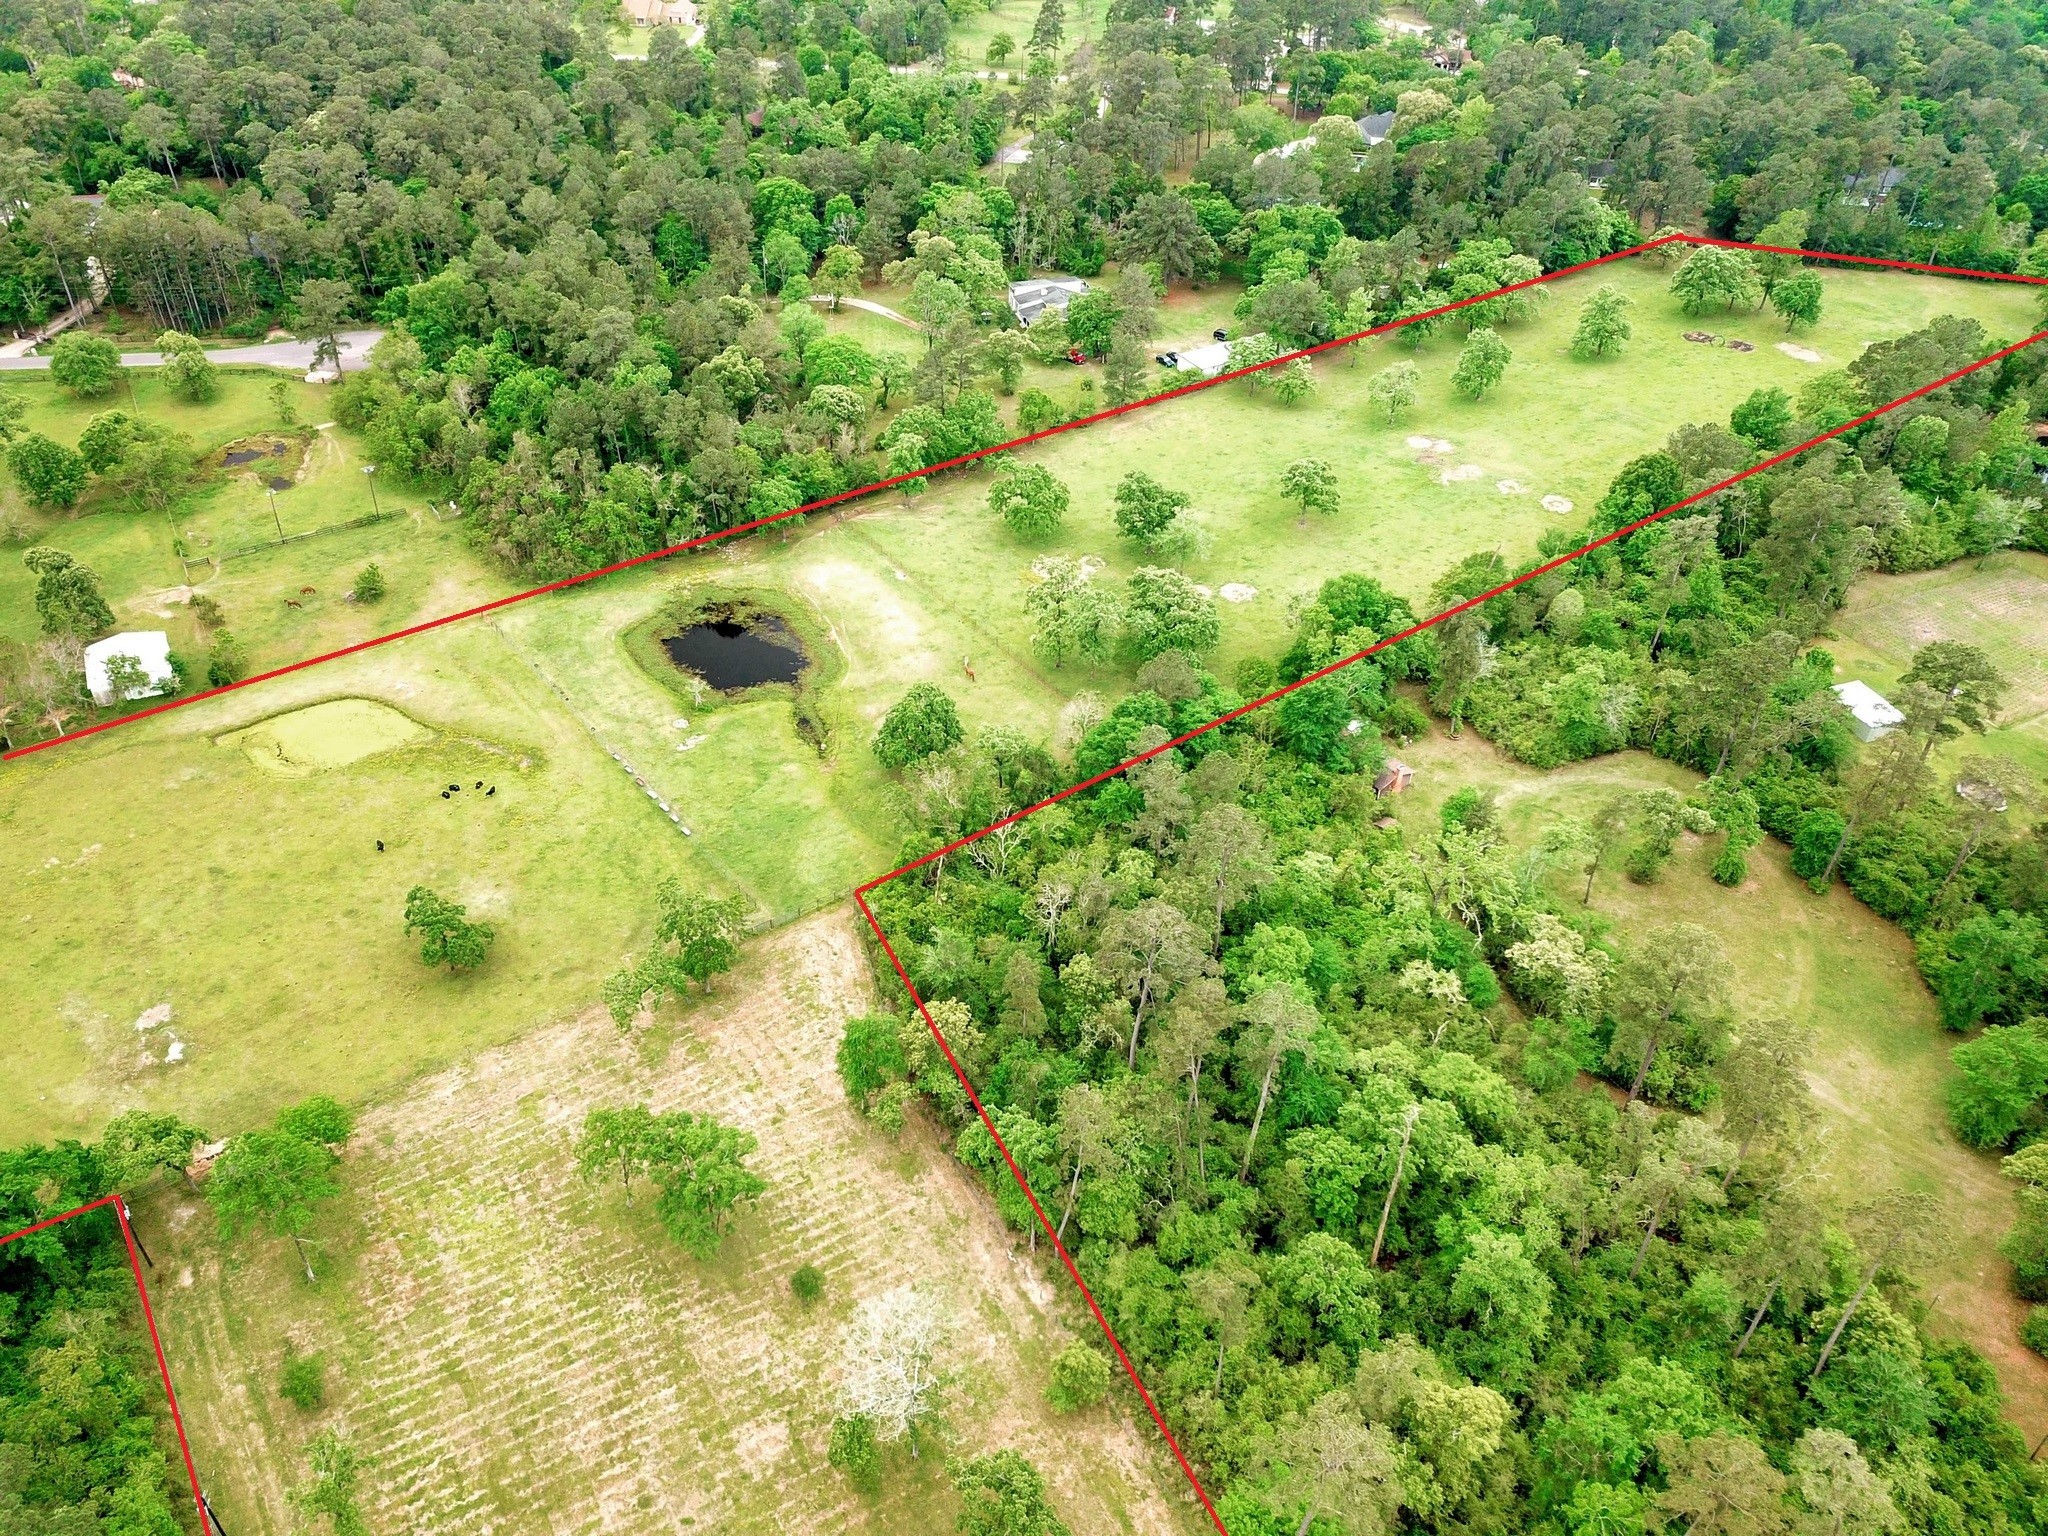 Over view of additional acreage for total purchase of up to 11 acres.